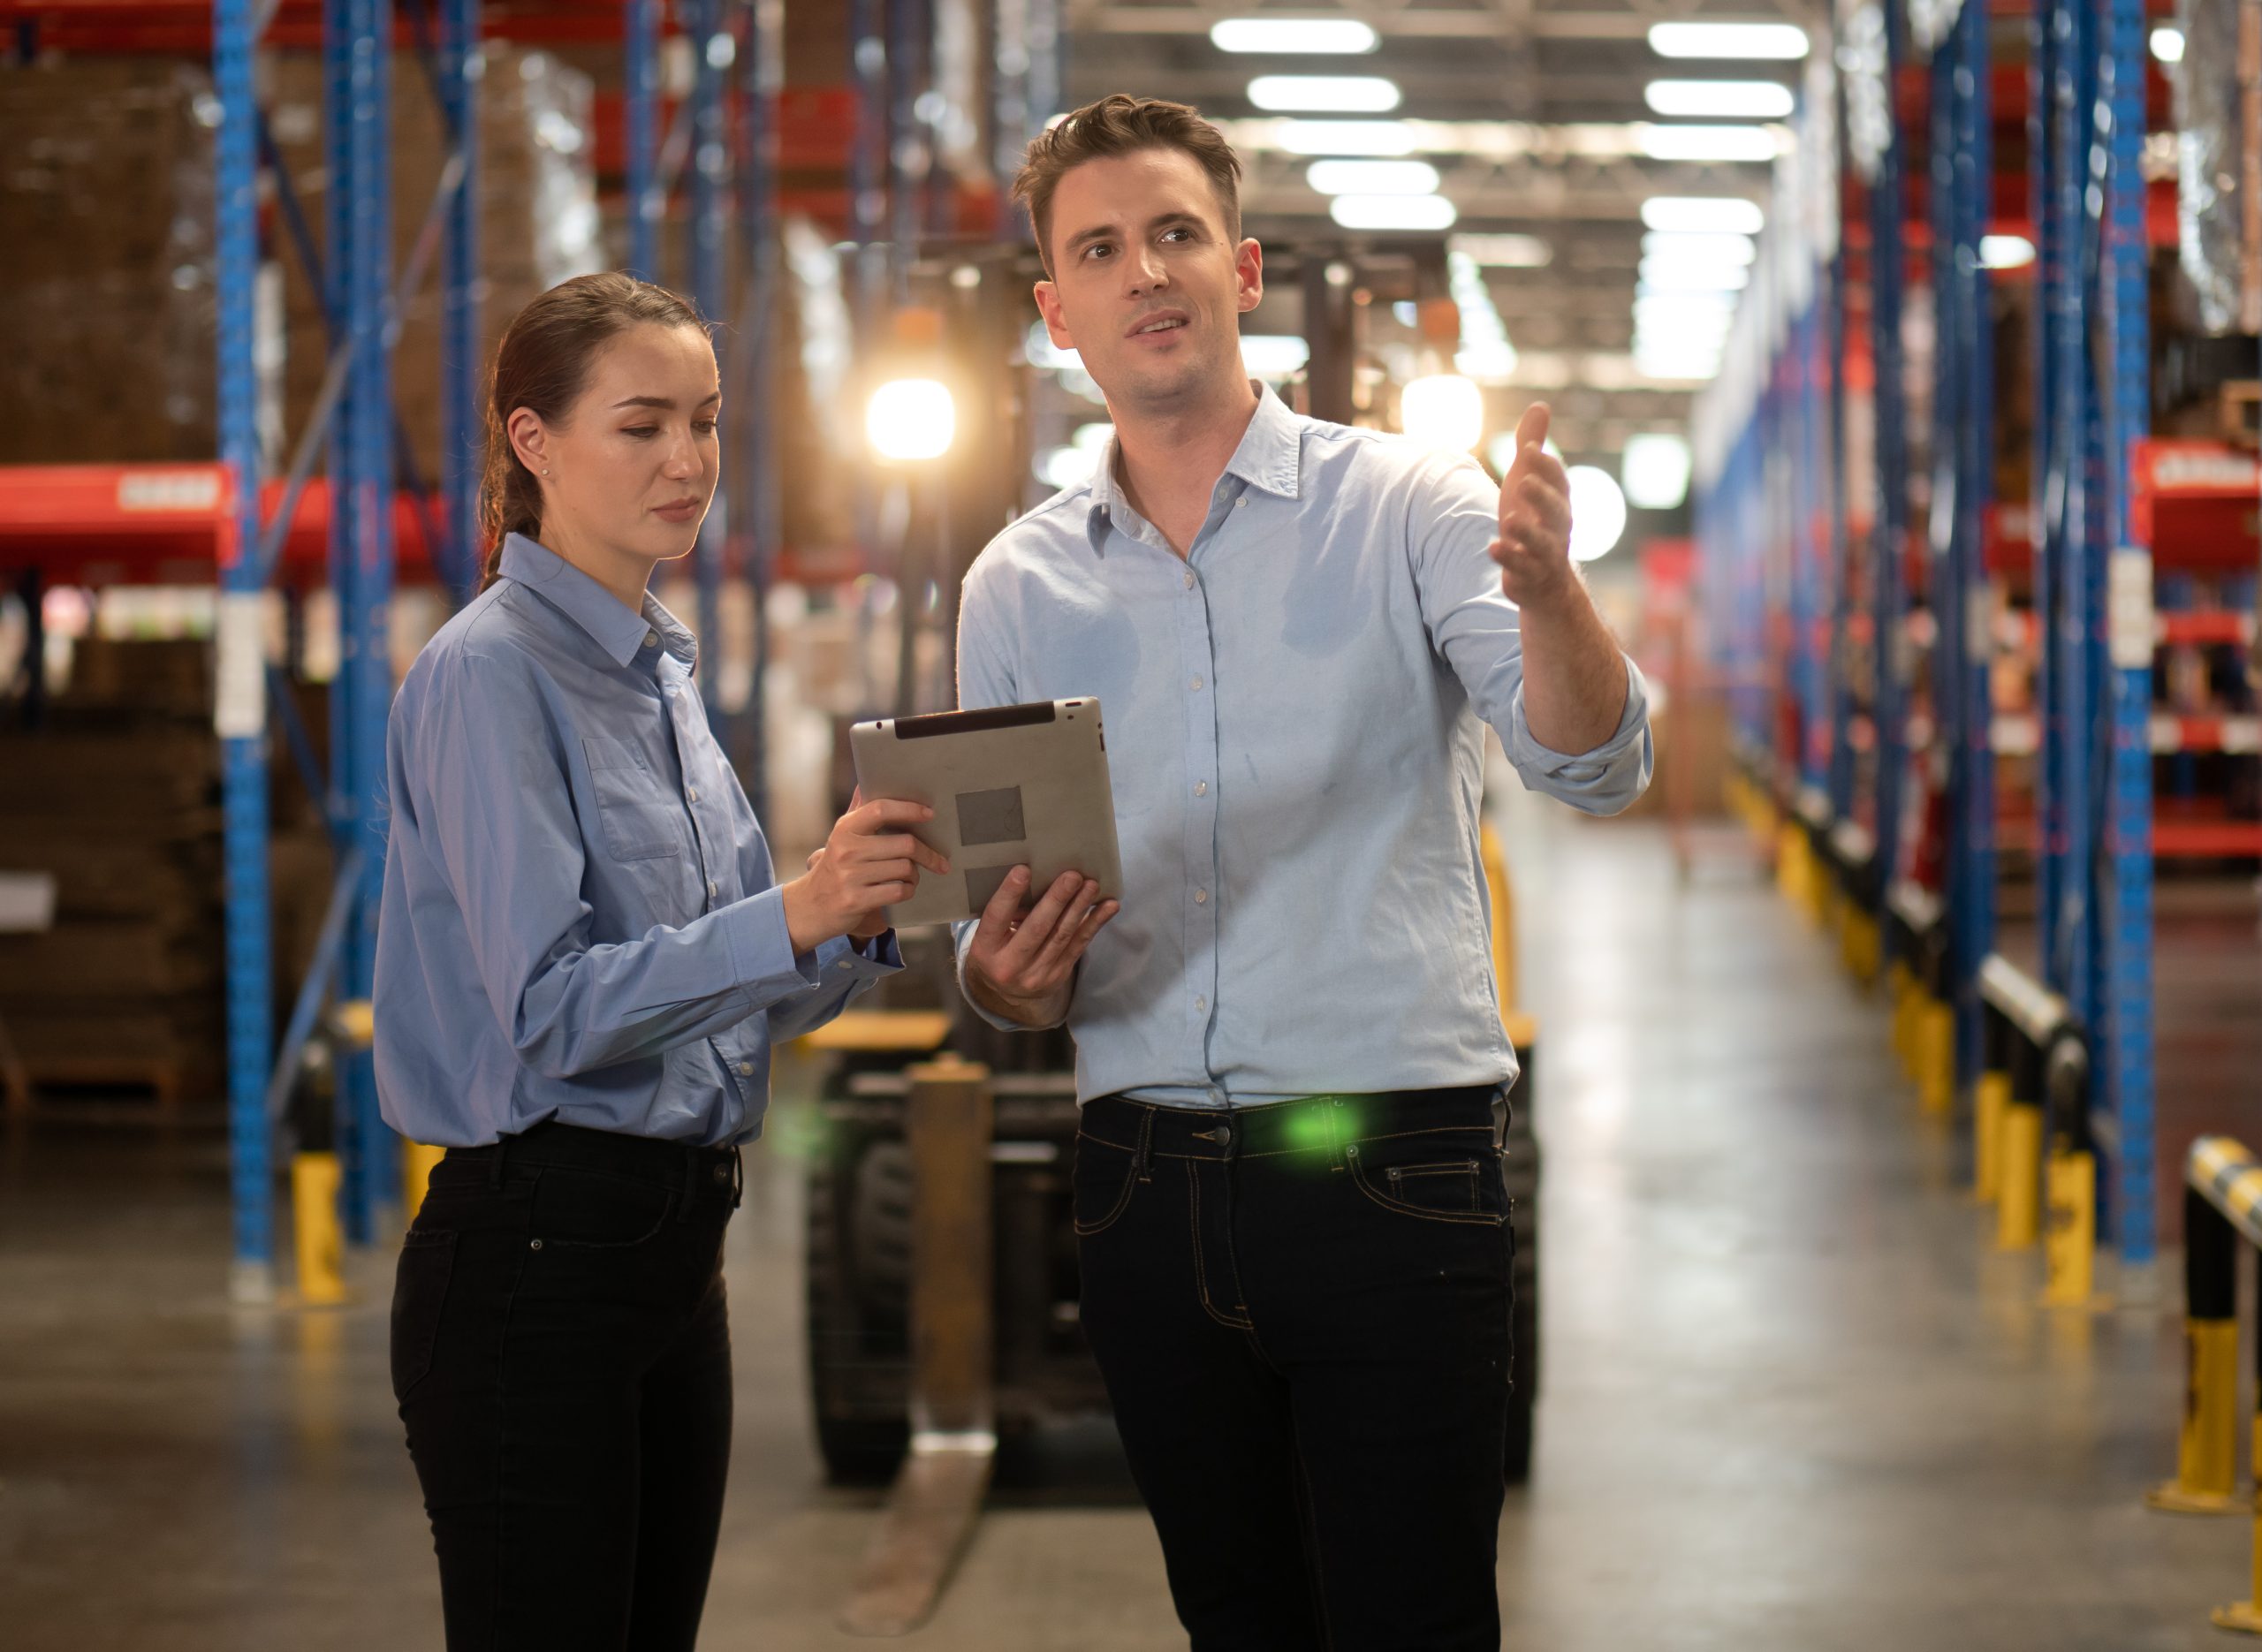 distribution warehouse manager and client businesswoman using digital tablet checking inventory storage on shelf.